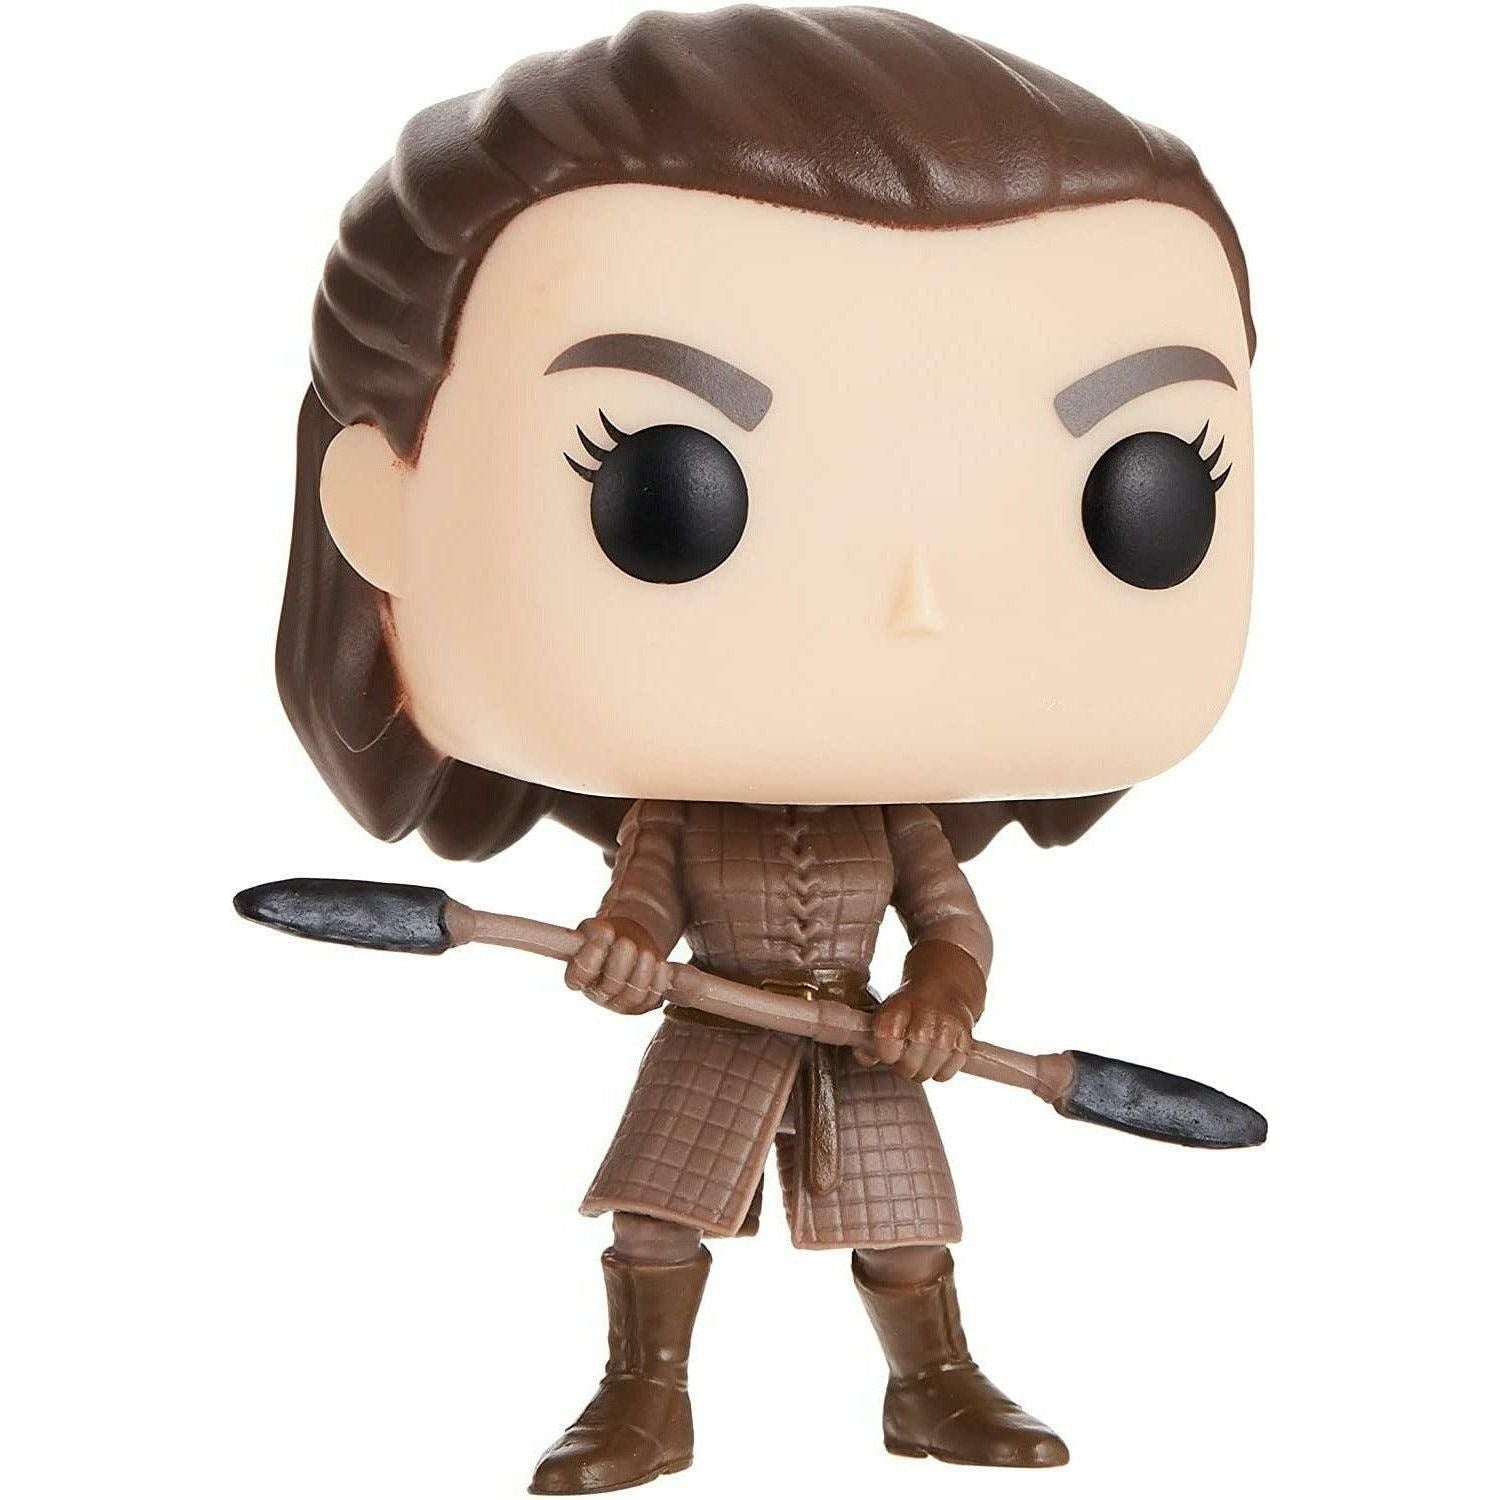 Funko POP TV Game of Thrones GOT - Arya with Two Headed Spear - BumbleToys - 18+, Boys, Figures, GOT, OXE, Pre-Order